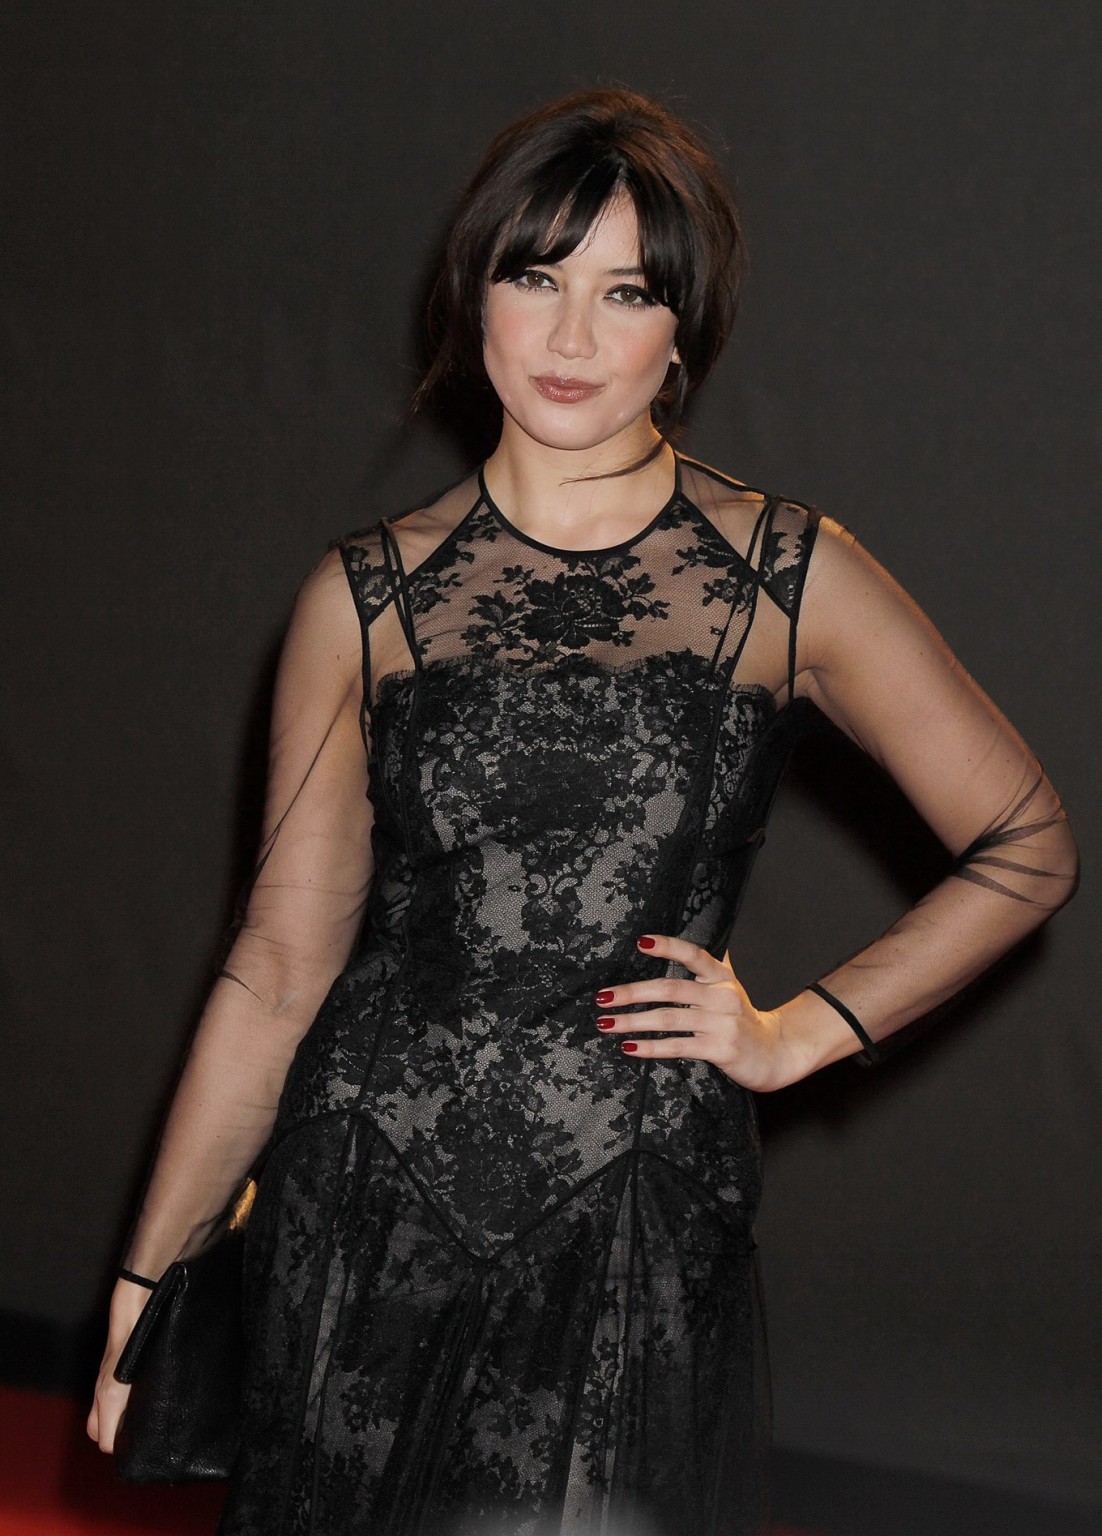 Daisy Lowe wearing black partially see-through dress at The British Fashion Awar #75211401